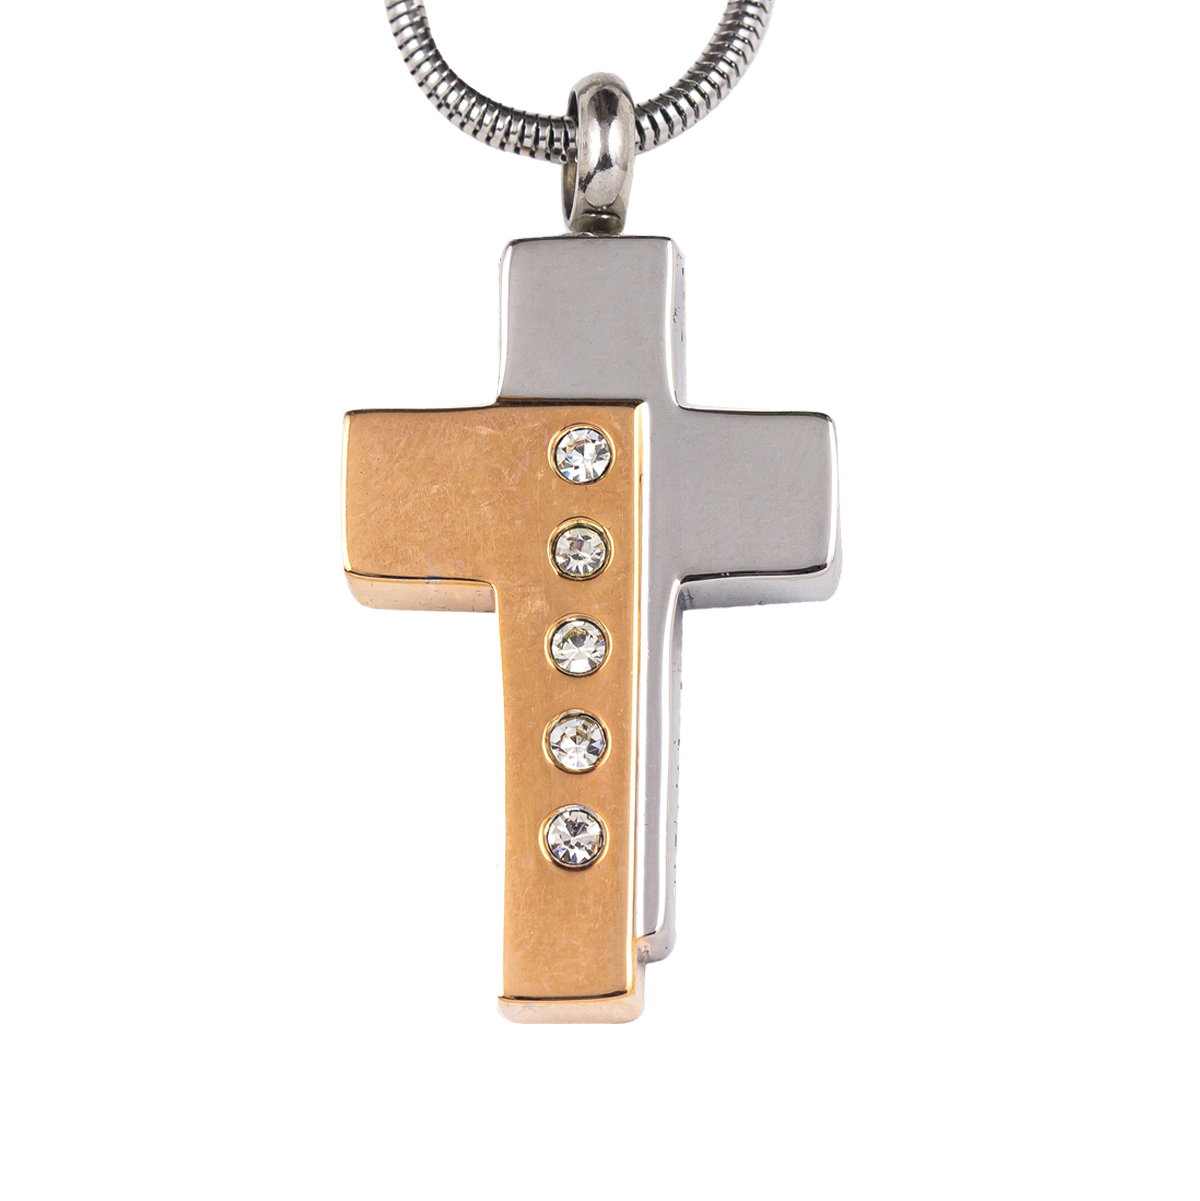 Gold and Silver Cross Stainless Steel Pendant